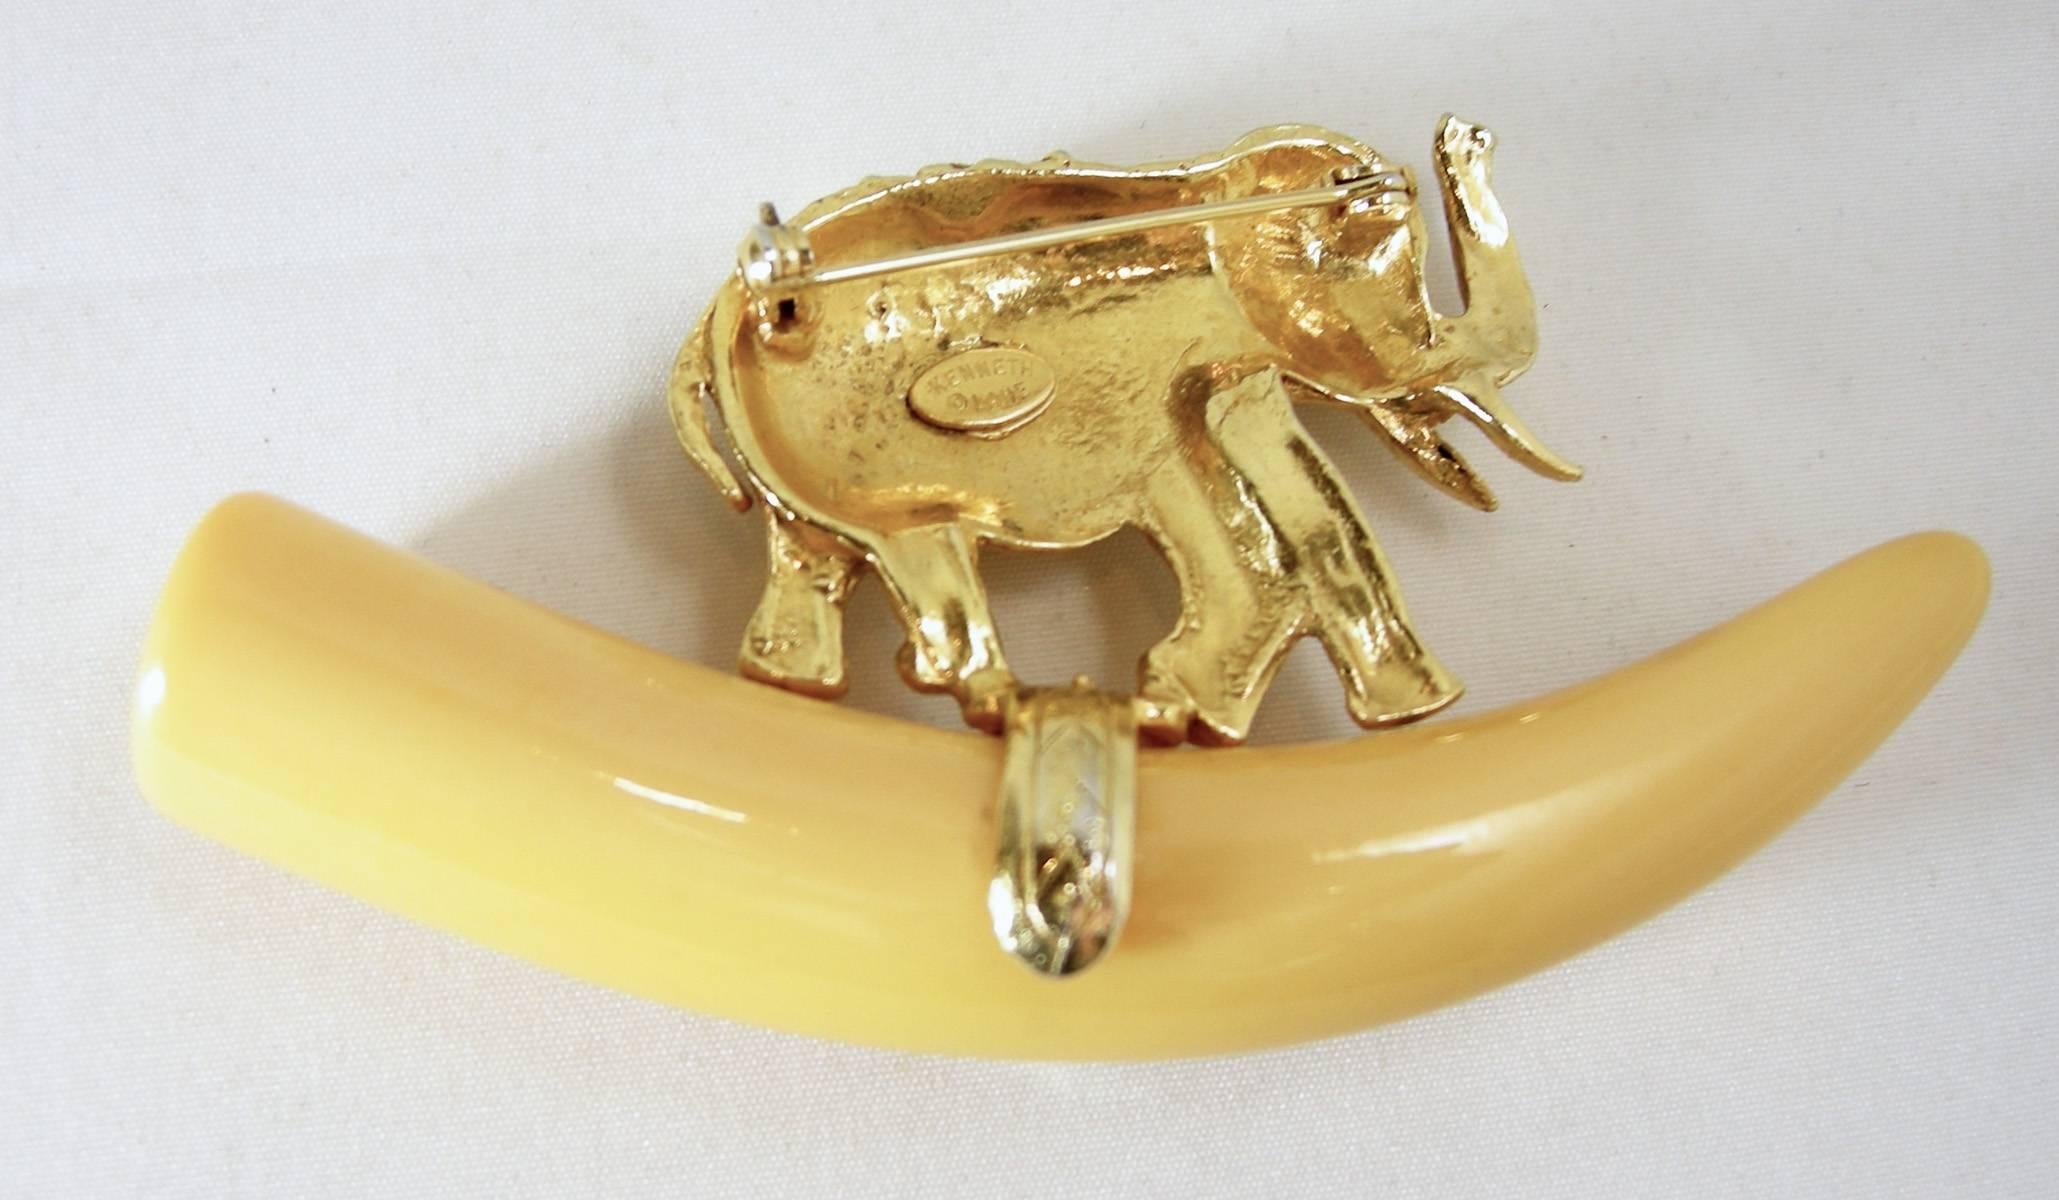 This Signed Kenneth Lane elephant on a resin tusk brooch is set in a gold tone setting and measures 3-1/2” x 2” It is in excellent condition.
